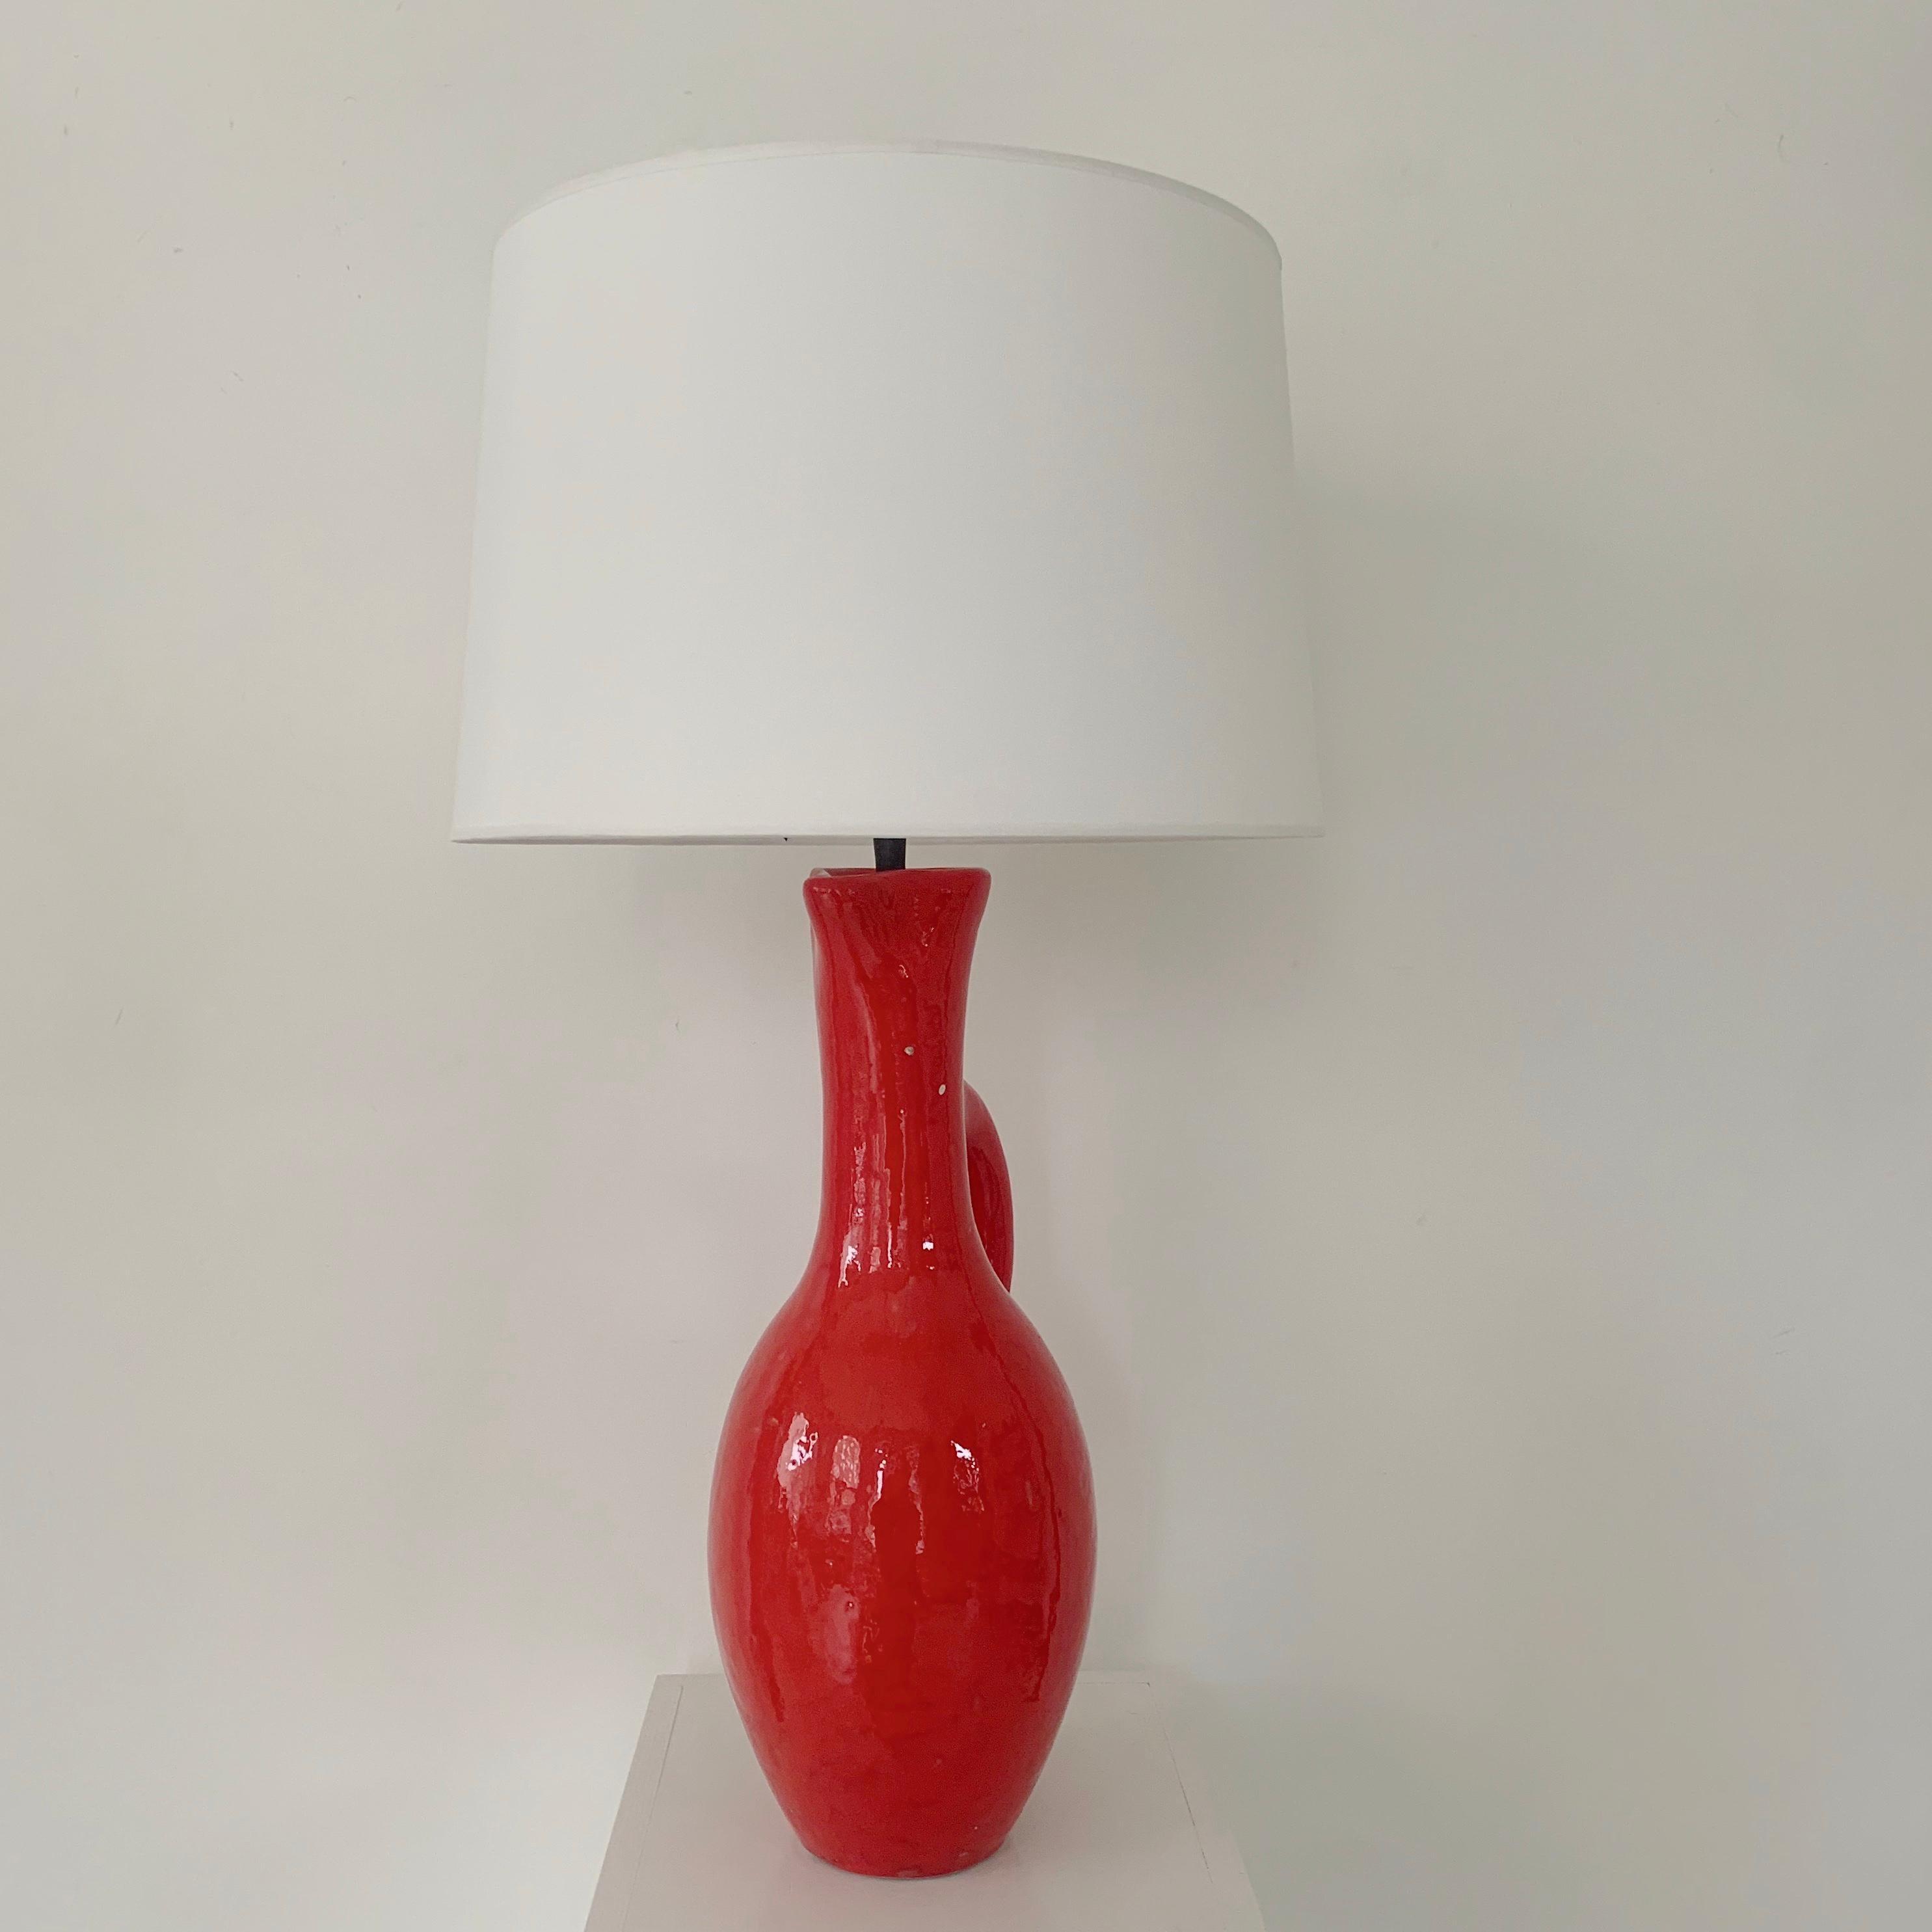 Enameled Les Archanges/Gilbert Valentin Large Signed Table Lamp, 1950s, Vallauris.